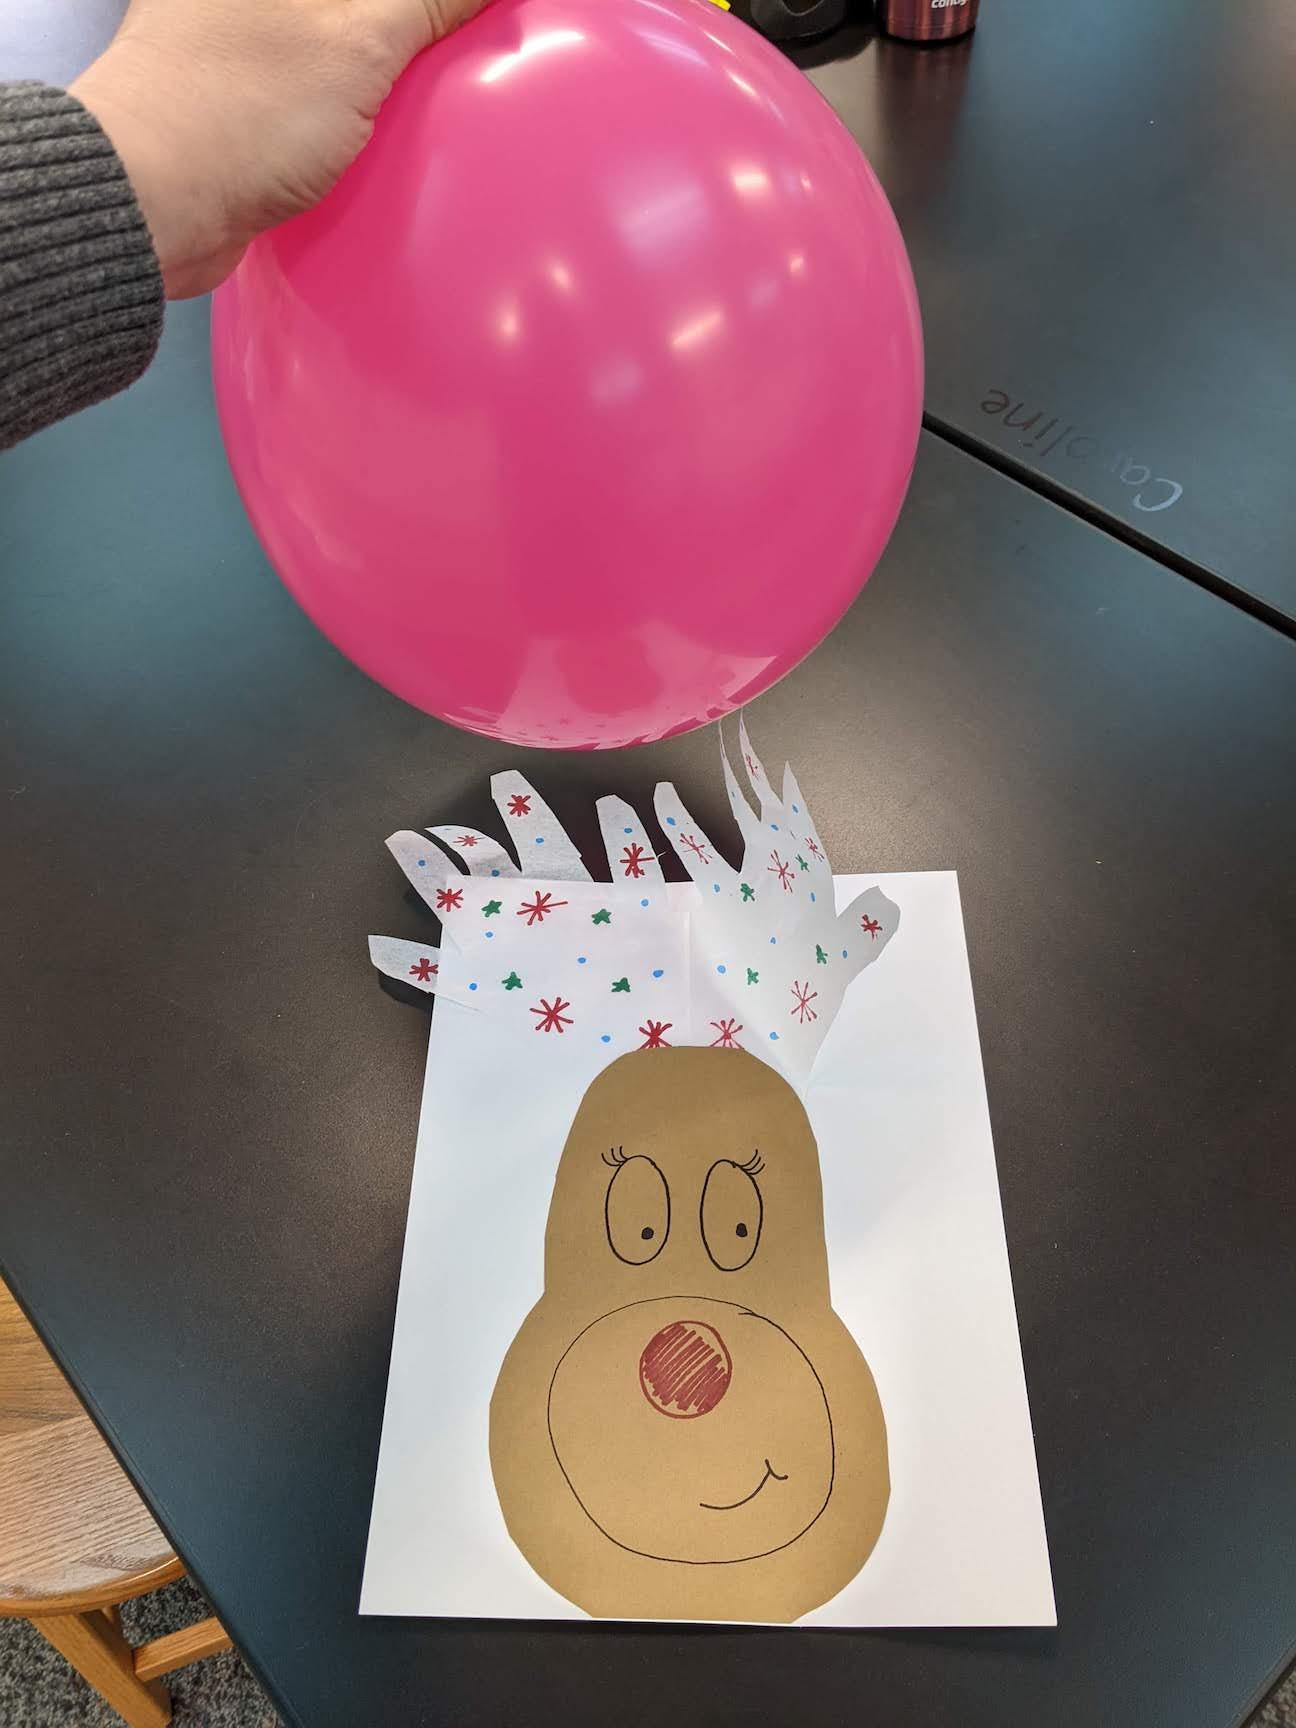 Reindeer’s tissue-paper antlers were attracted by the static electricity of the balloon